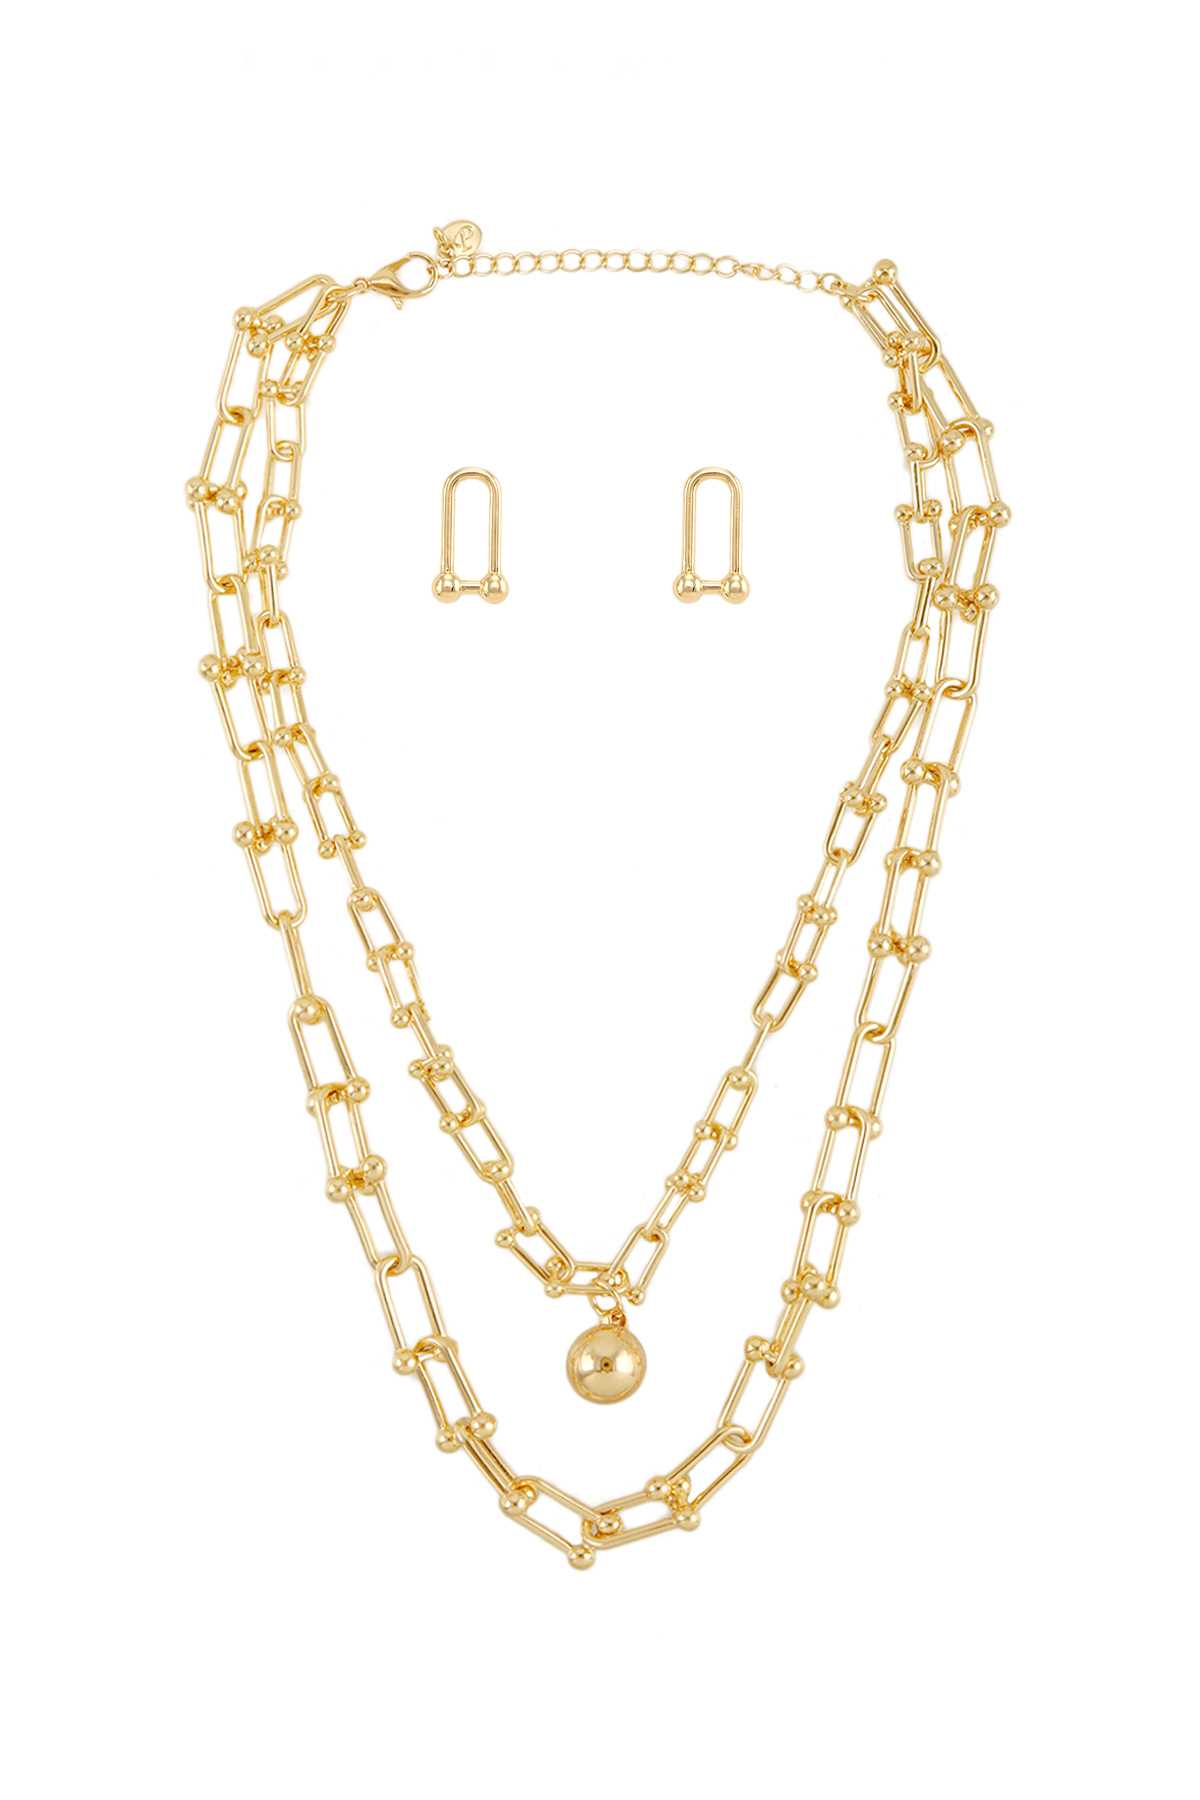 Geometric Oval Double Chain Linked Necklace Set